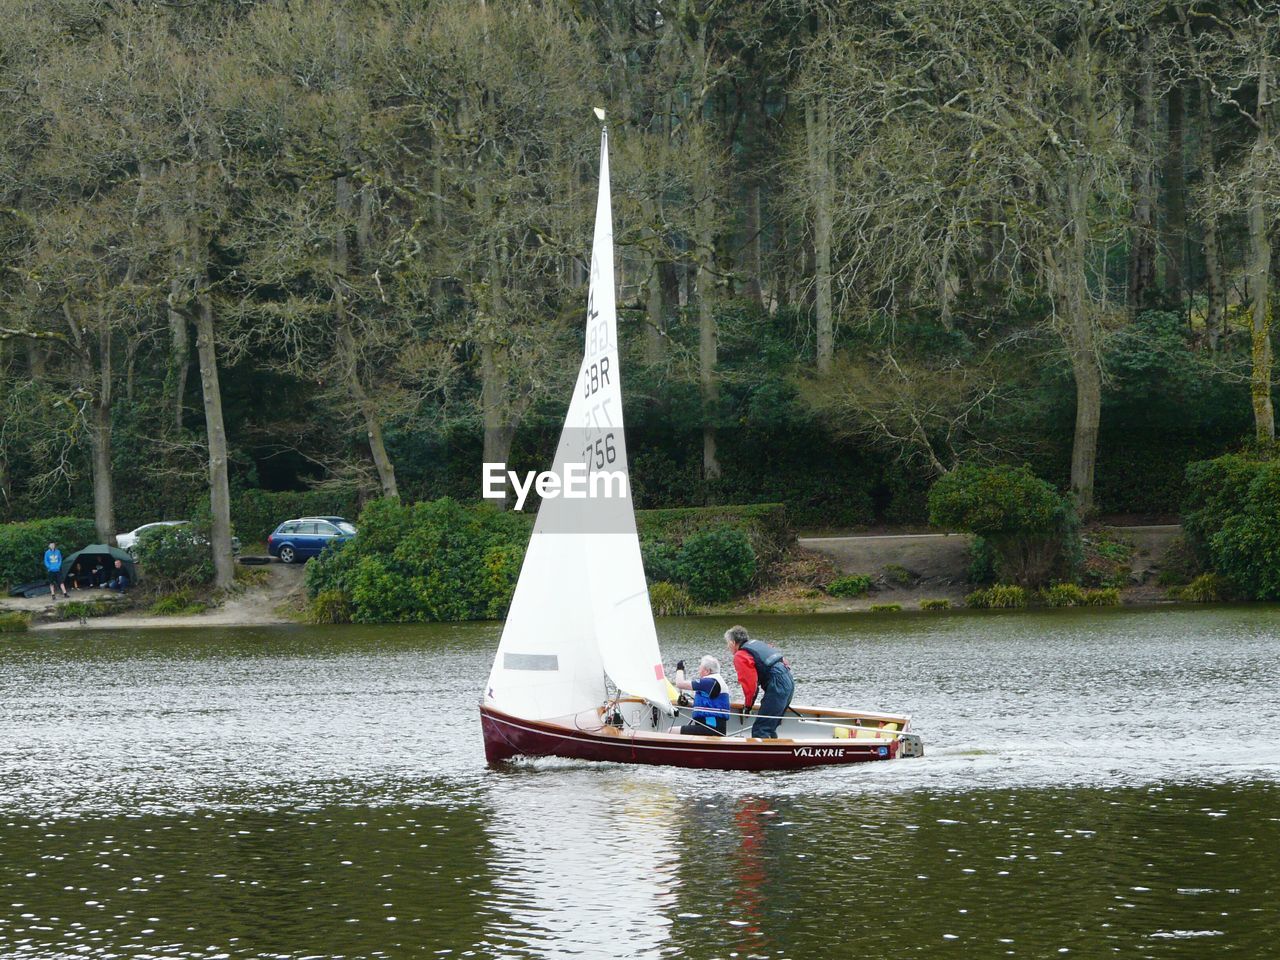 PERSON ROWING BOAT IN RIVER